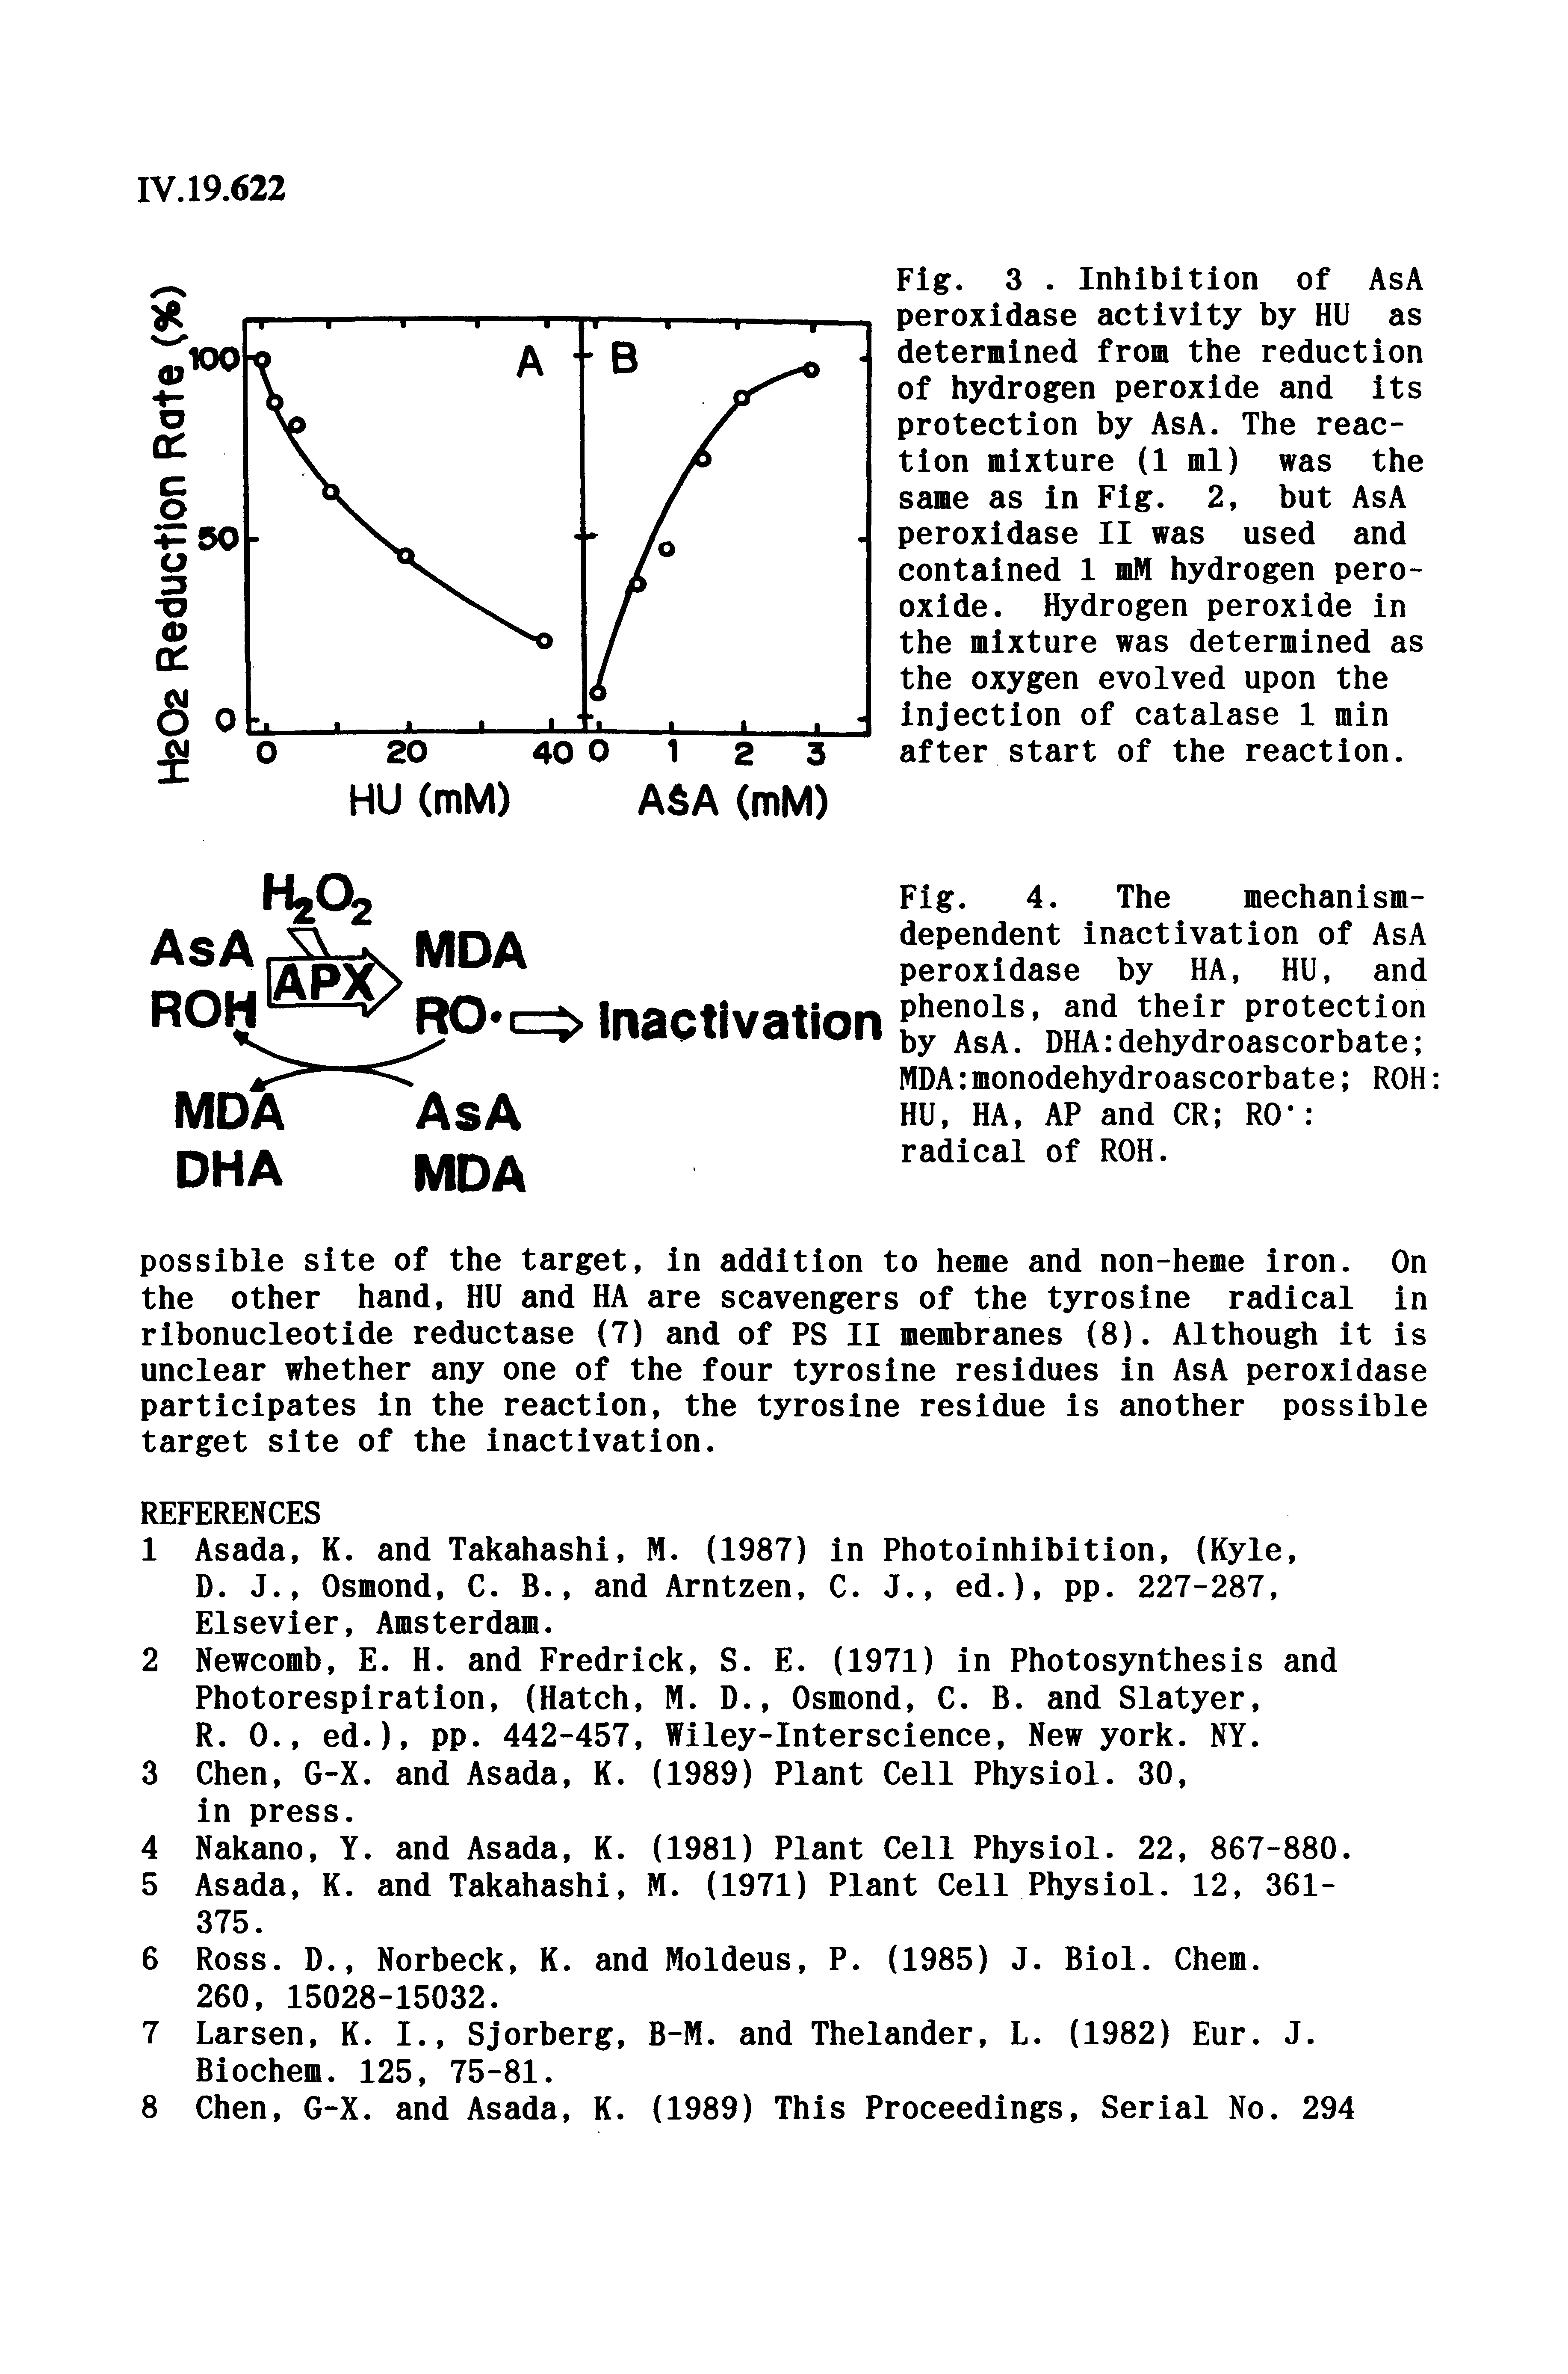 Fig. 4. The mechanism-dependent inactivation of AsA peroxidase by HA, HU, and phenols, and their protection by AsA. DHA dehydroascorbate MDA monodehydroascorbate ROH HU, HA, AP and CR R0 radical of ROH.